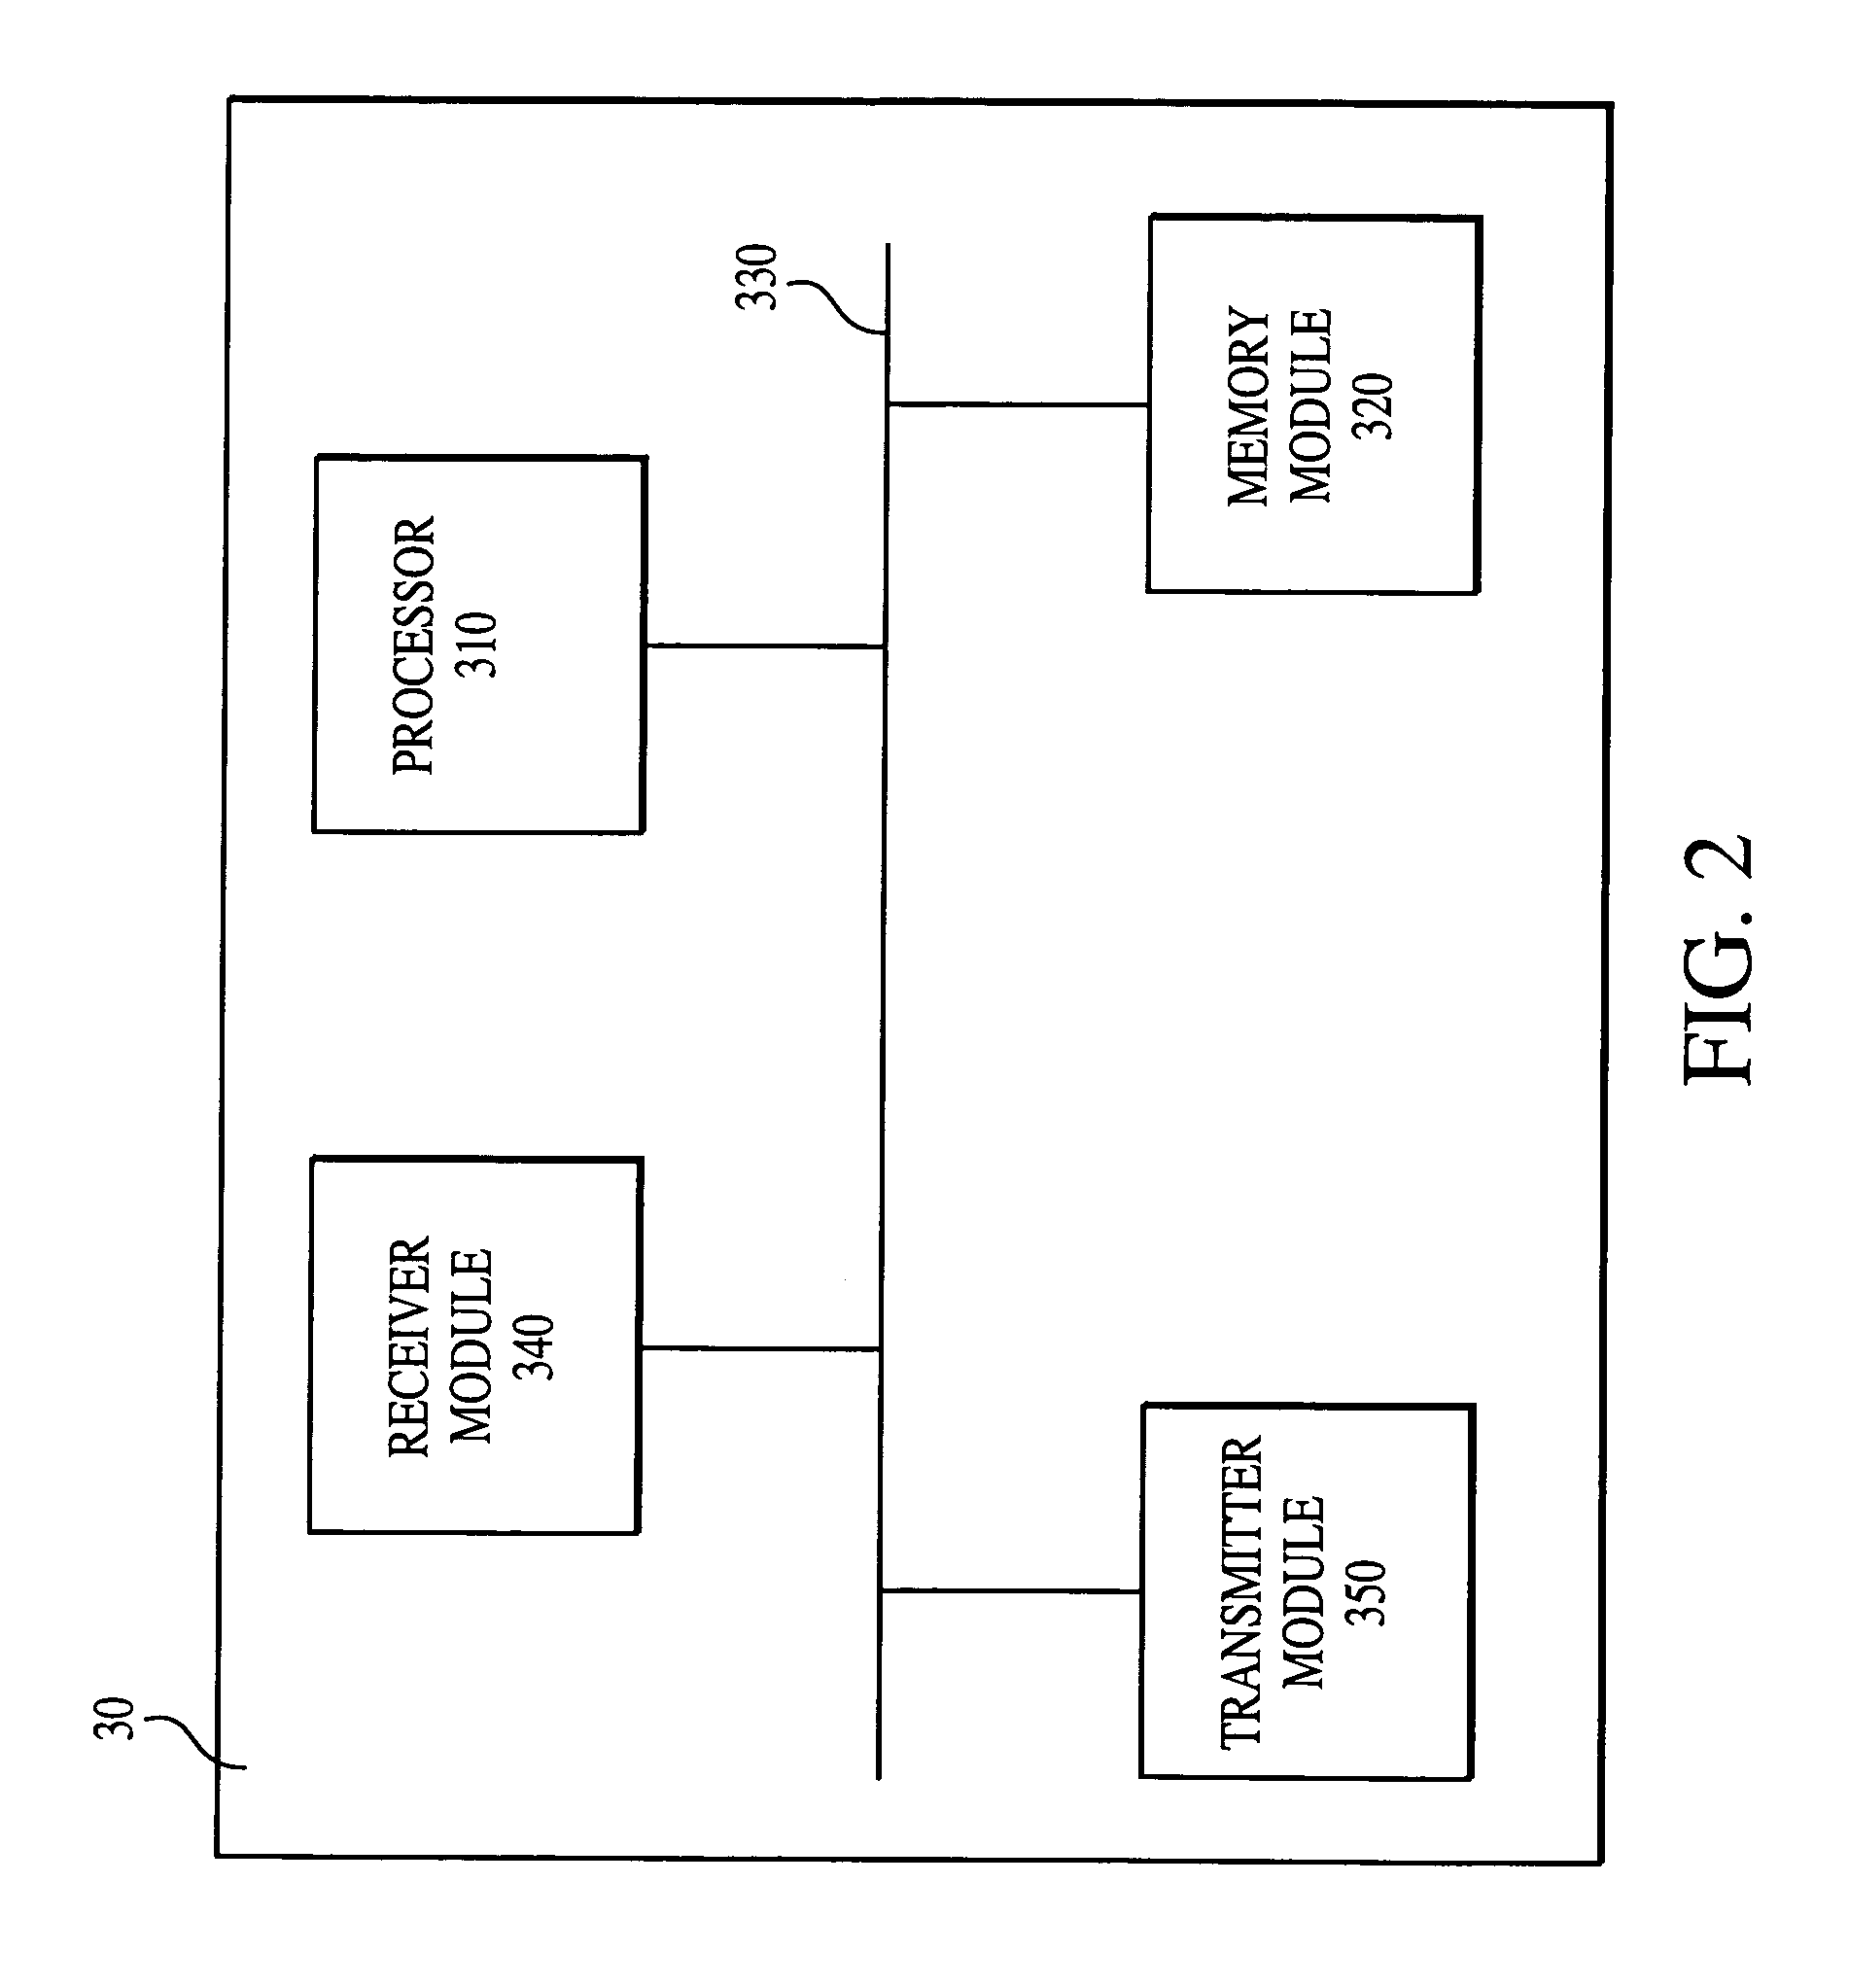 Method and apparatus for communicating via virtual office telephone extensions